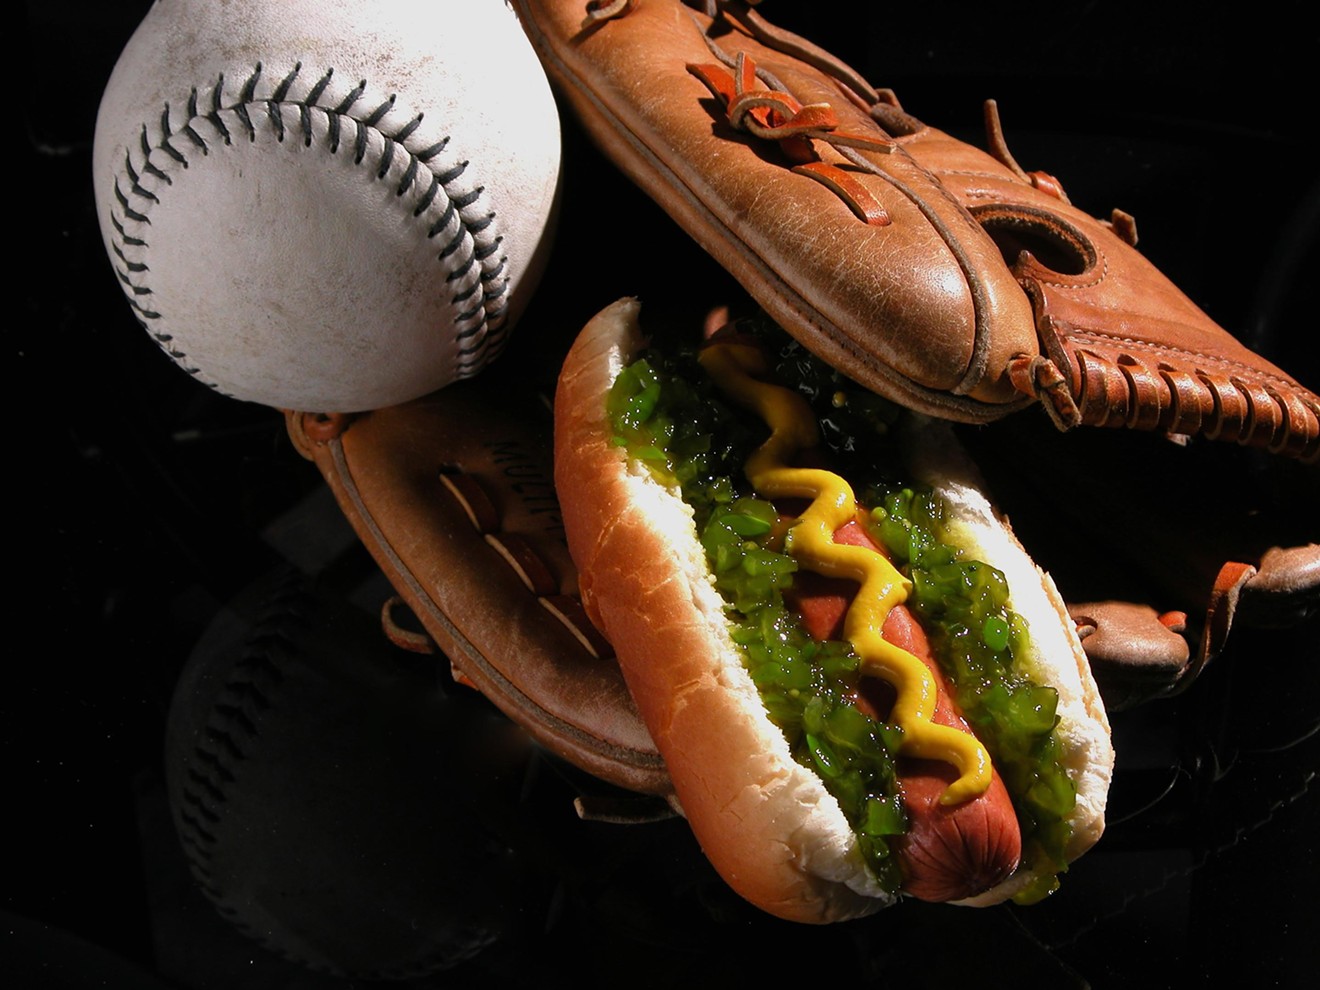 The Miami Marlins are offering a new deal that allows fans to wolf down an endless supply of food.